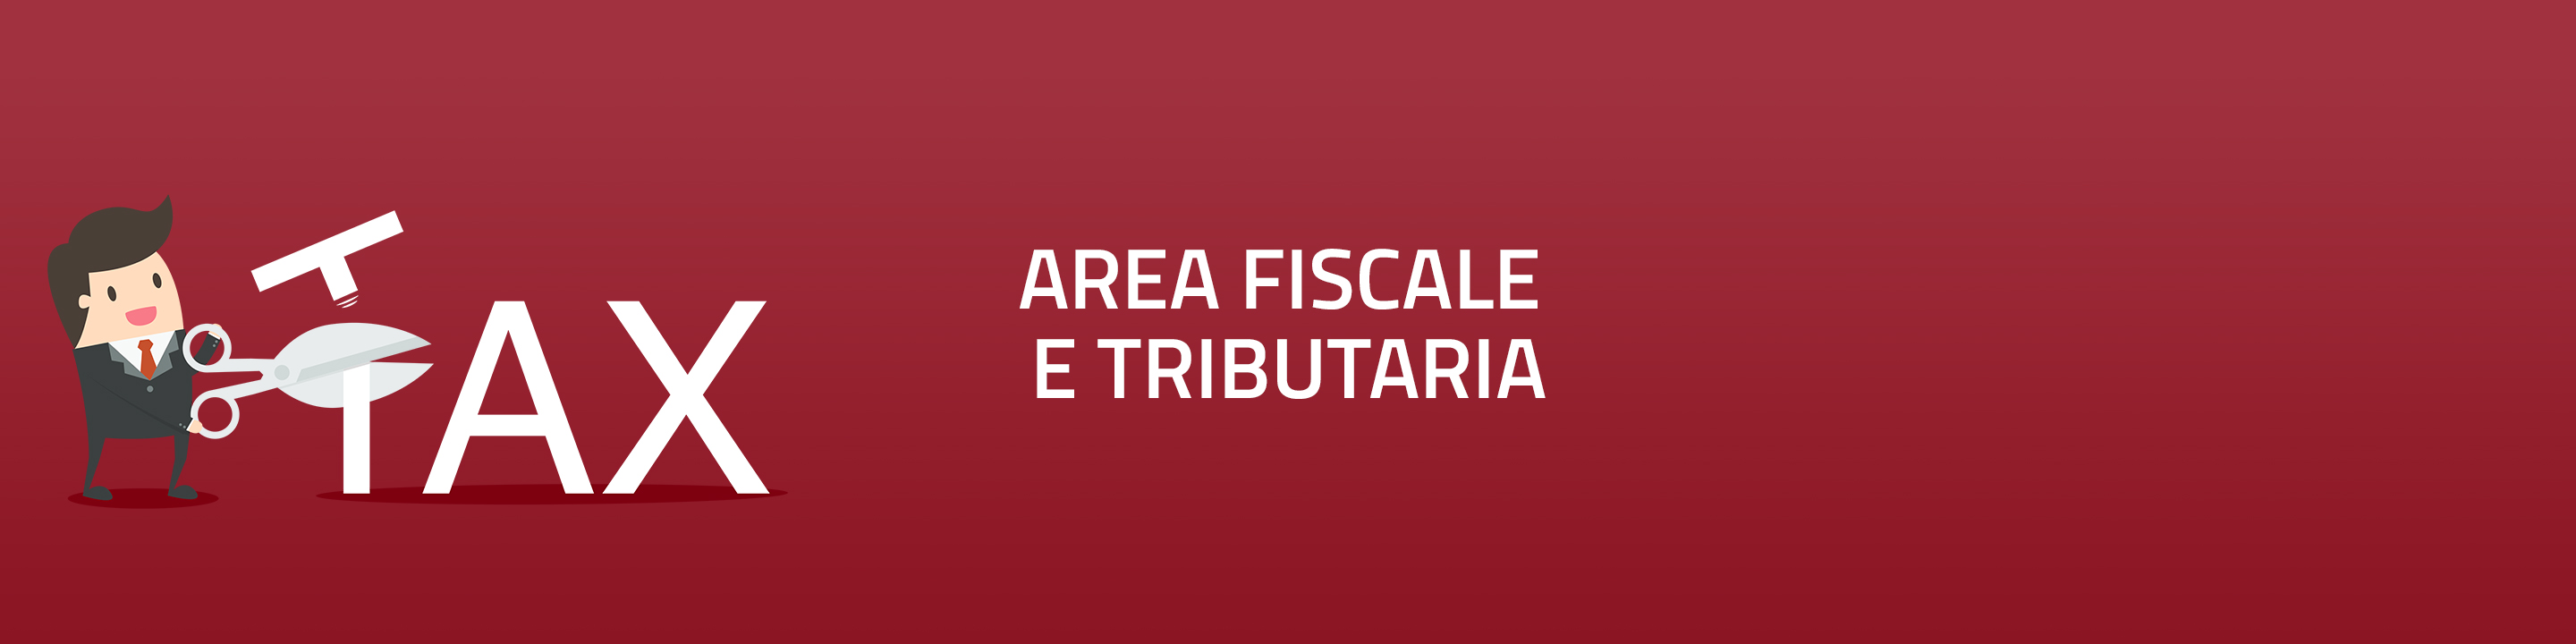 banner-area-fiscale